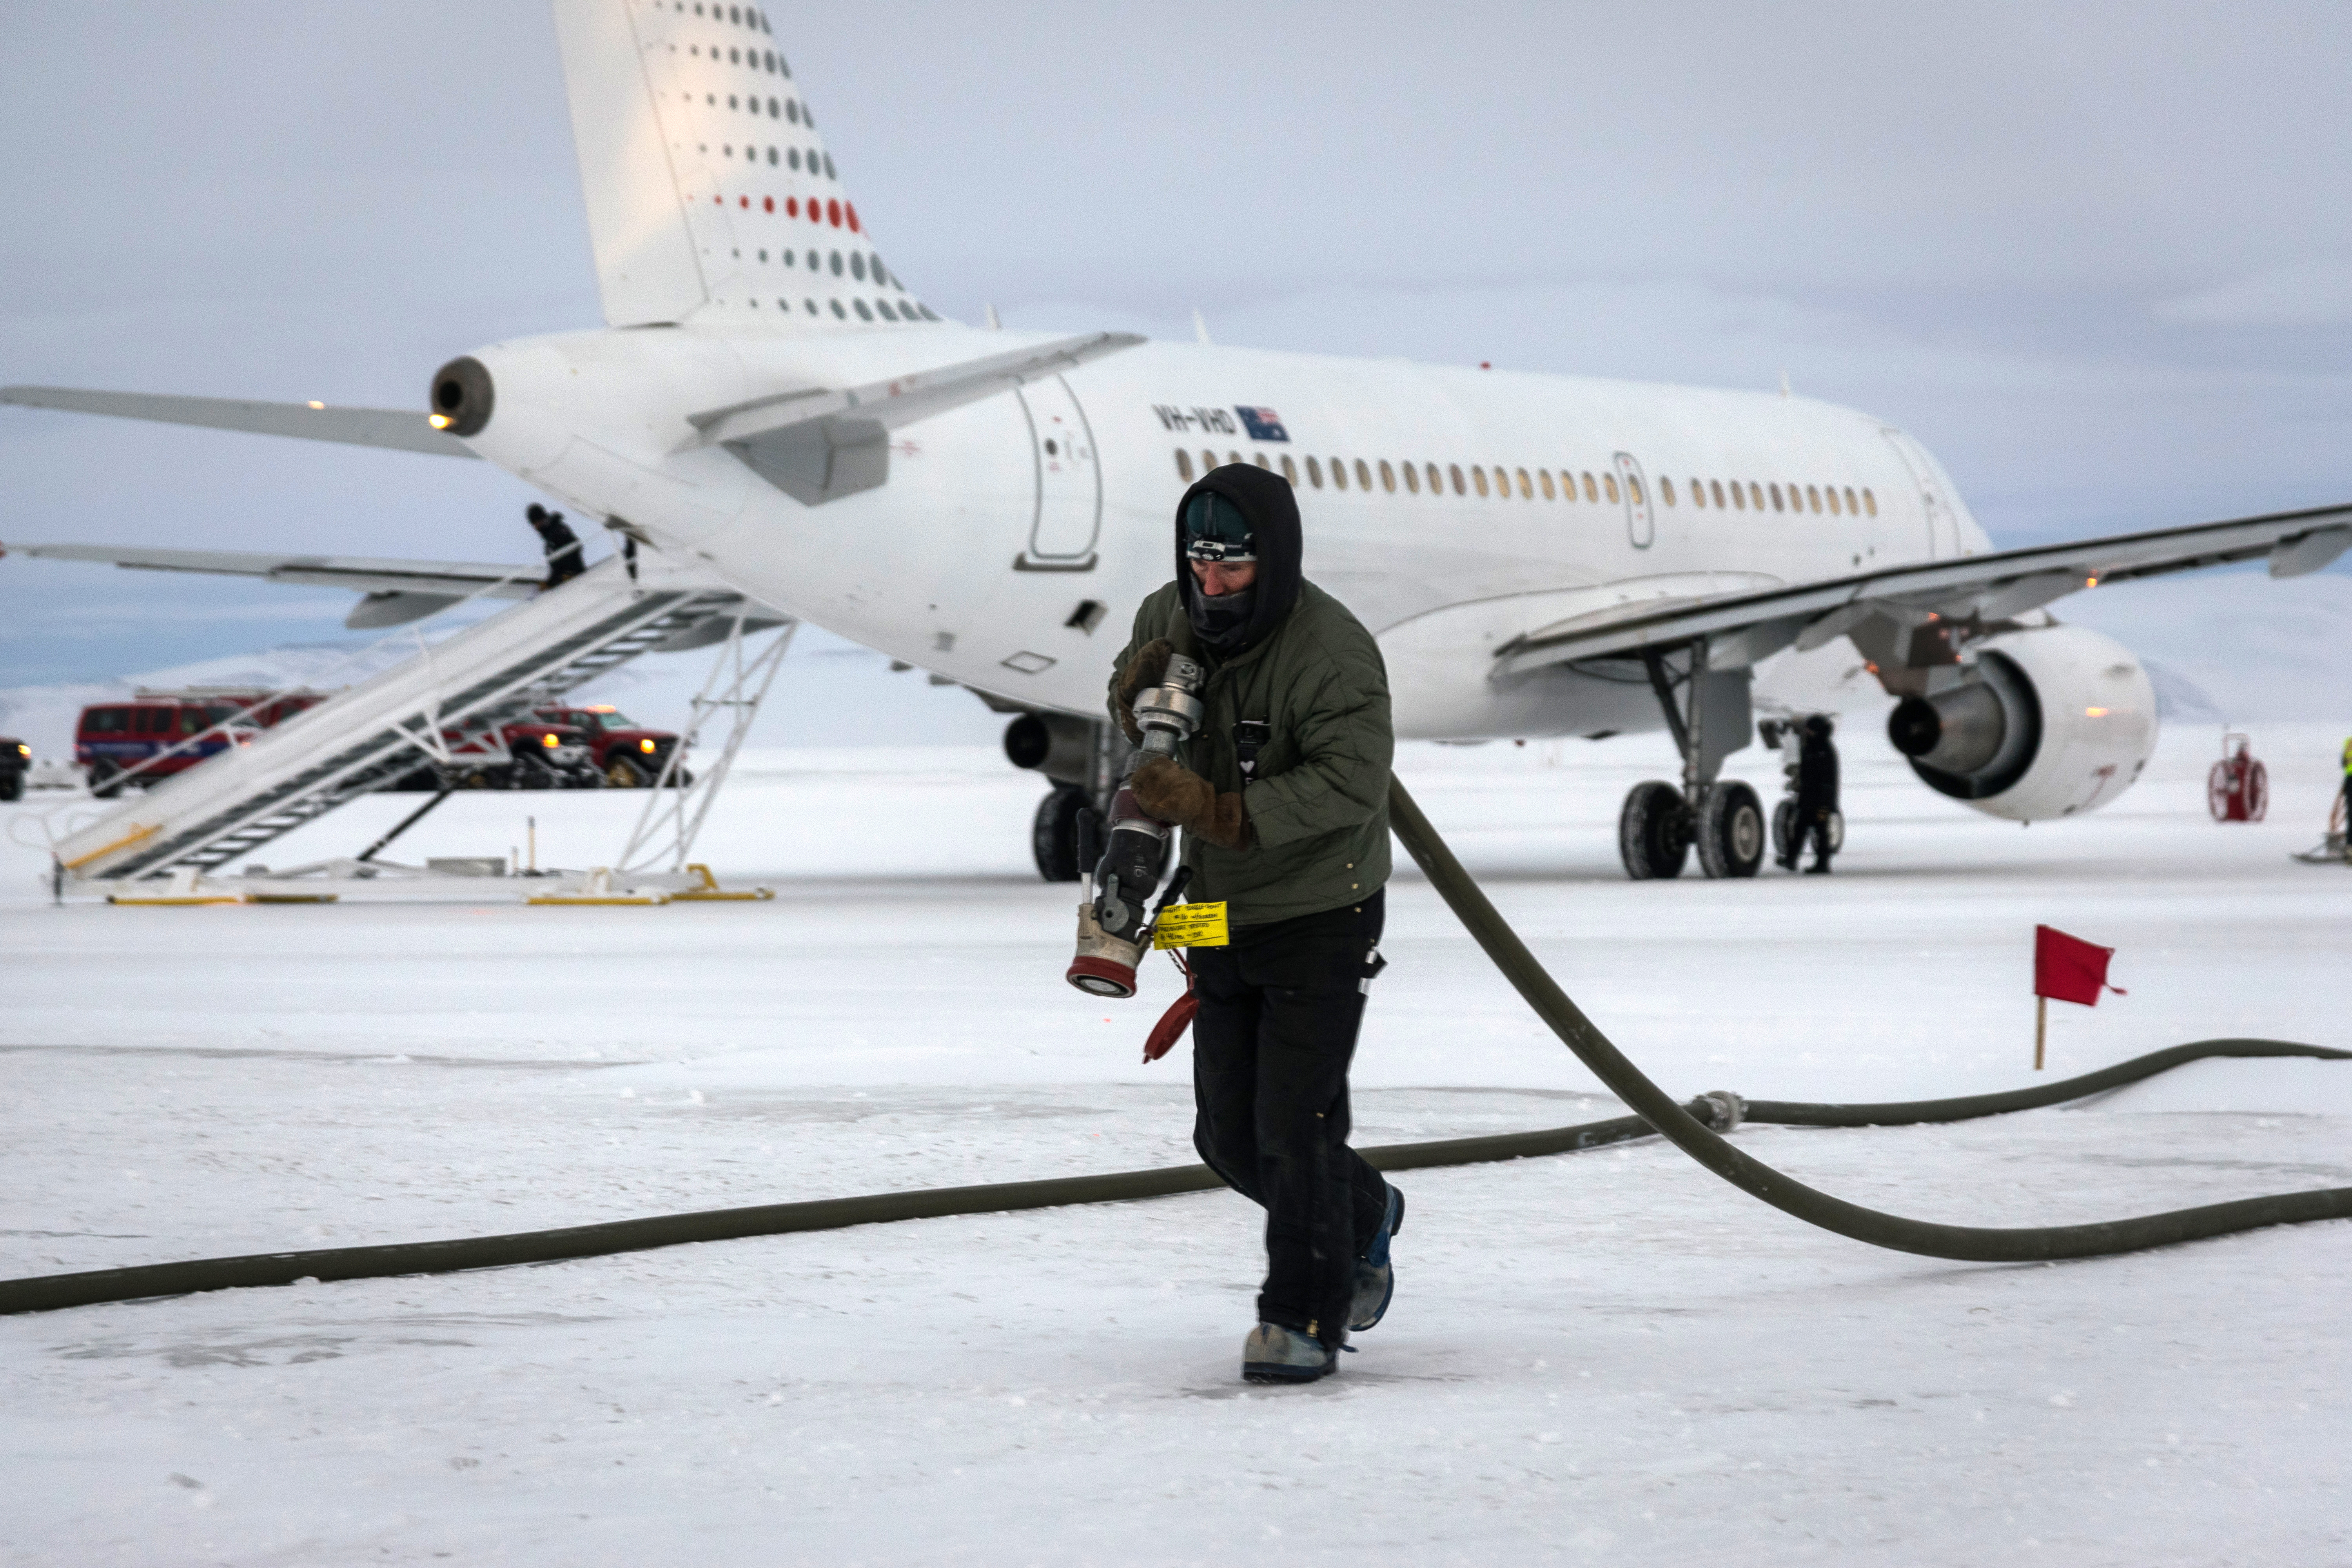 A man with a fuel hose walks away from a parked jet.